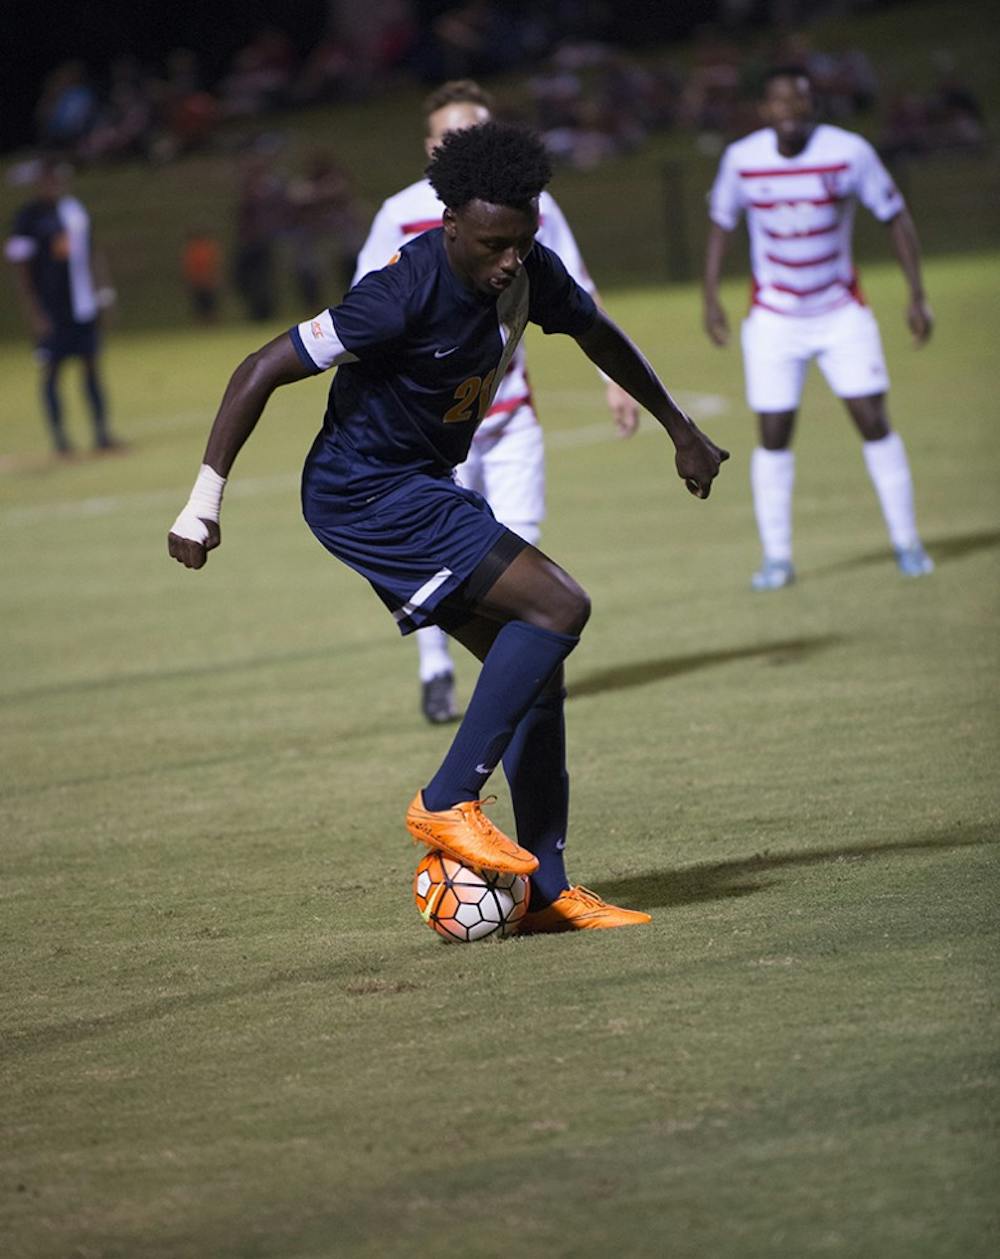 <p>Freshman midfielder Derrick Etienne tallied his first career goal Monday against VCU, chipping in his shot over the Rams' goalkeeper in the 84th minute.</p>